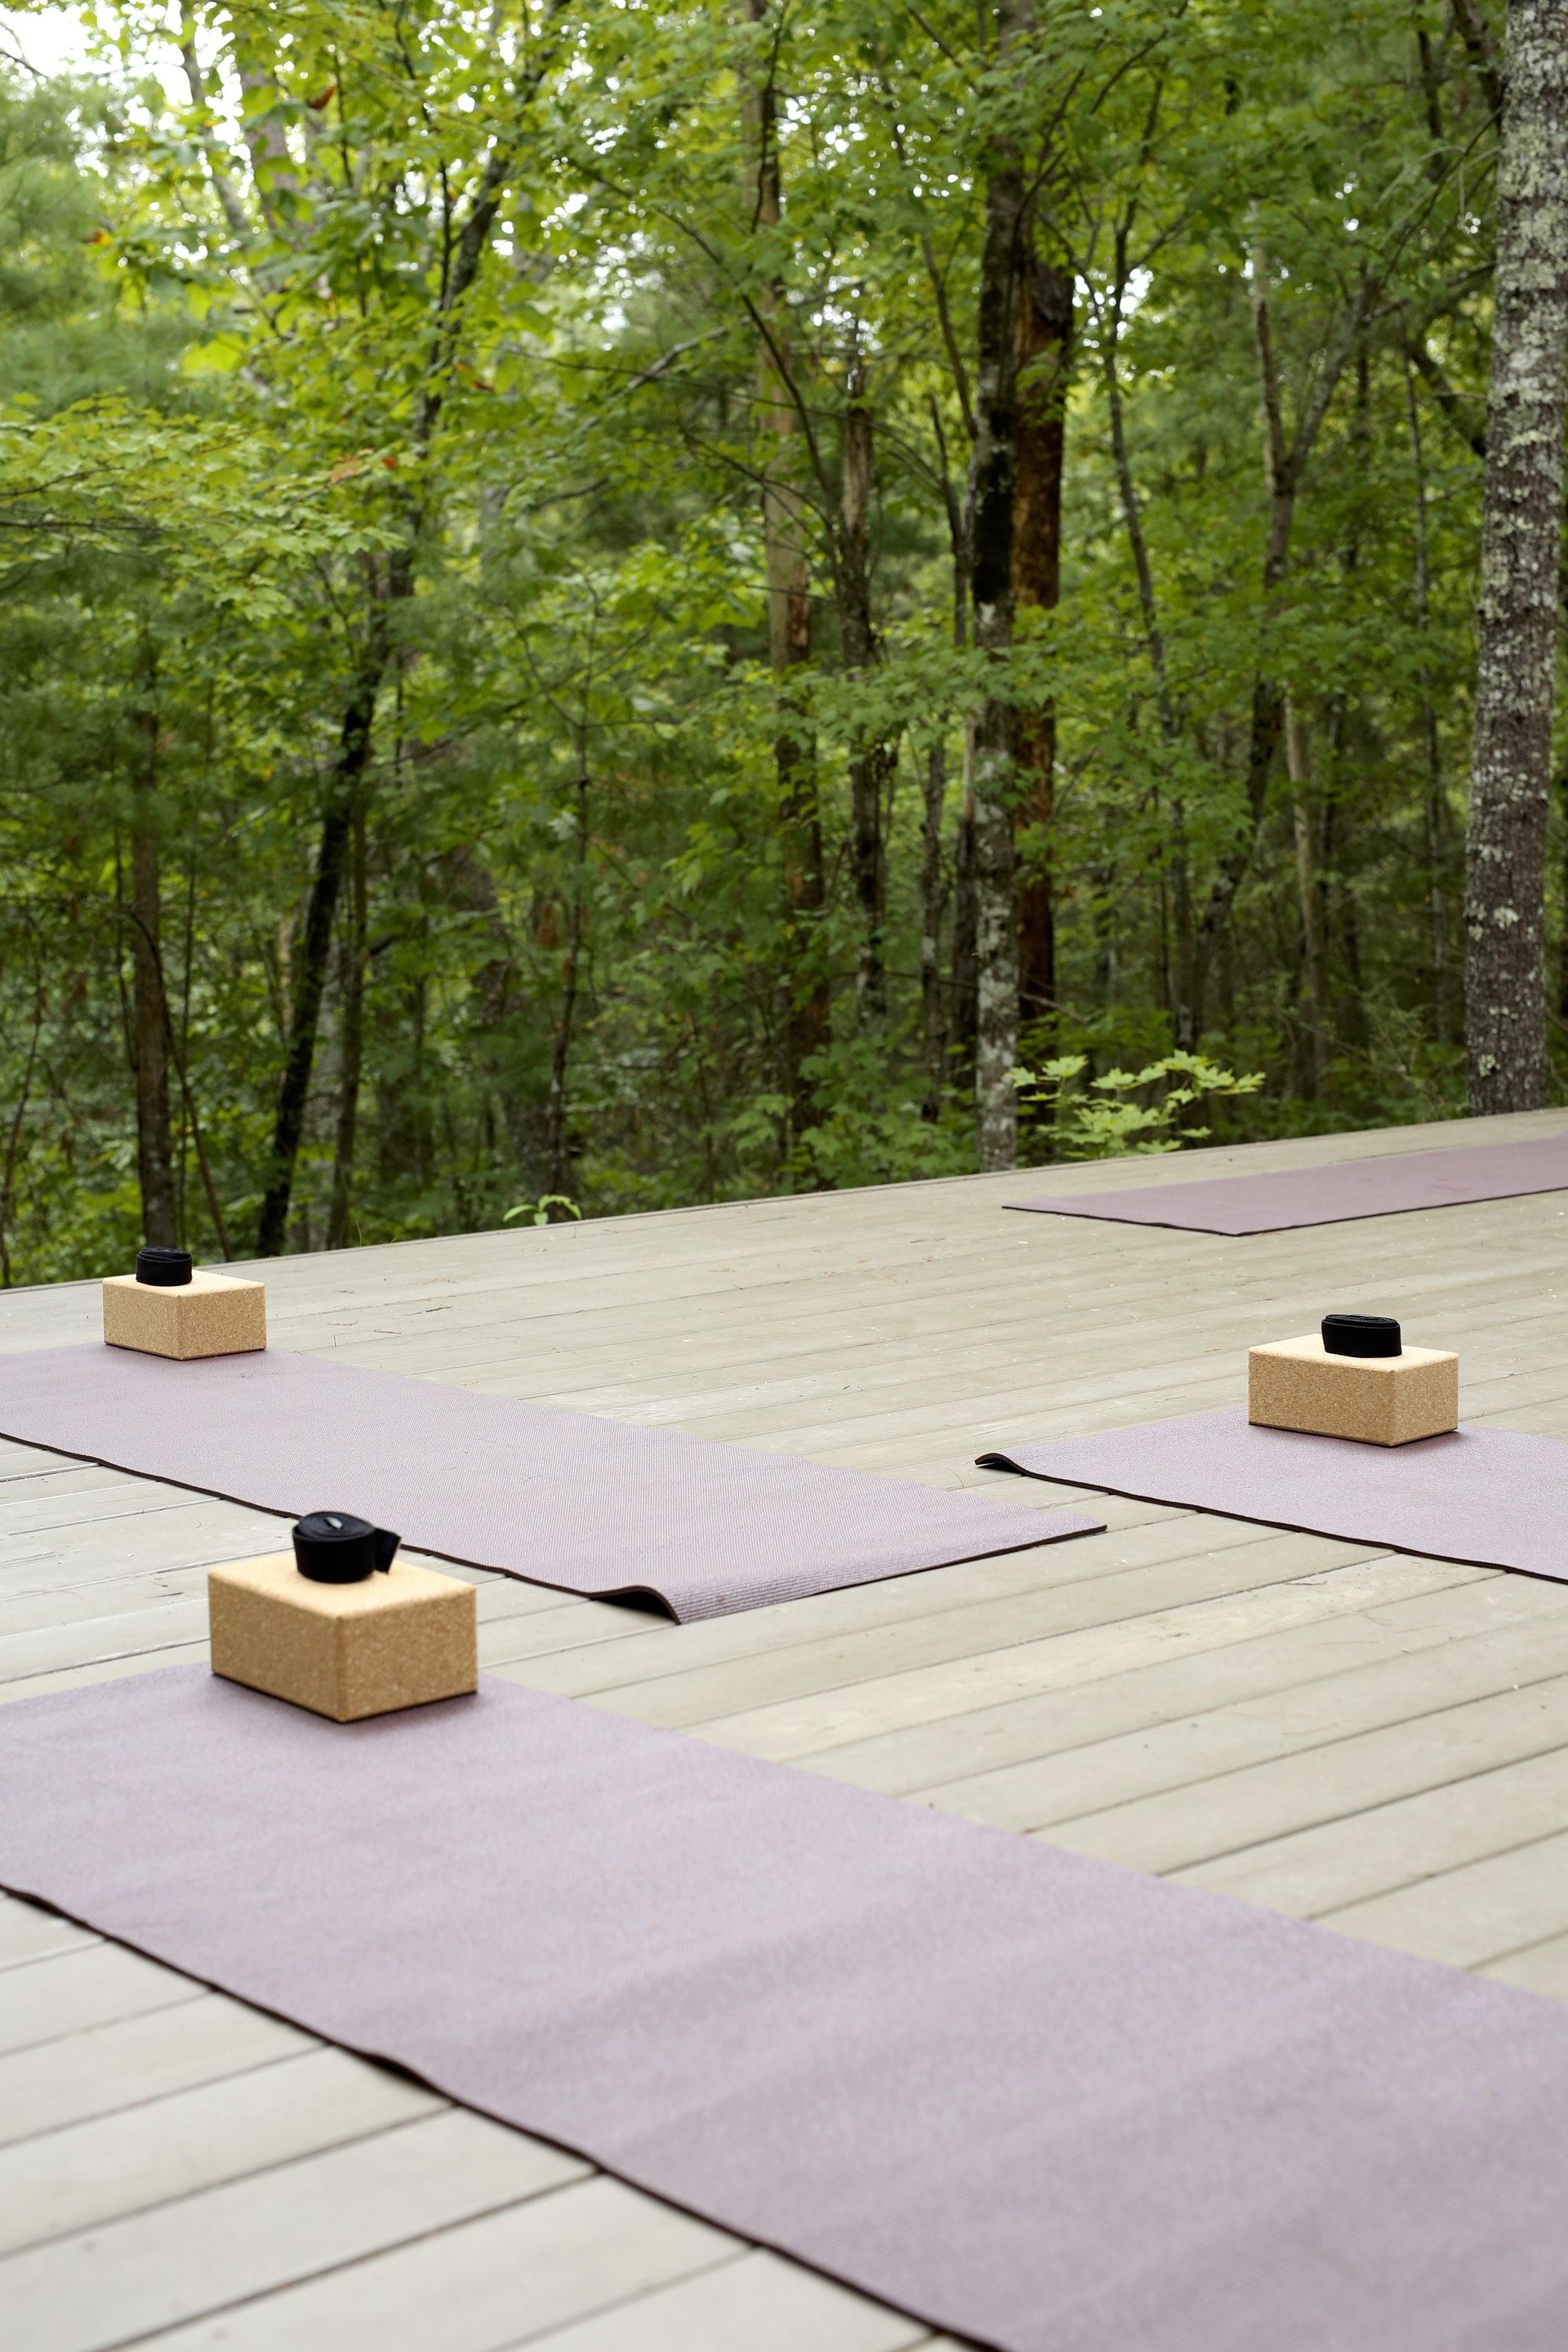 the outdoor yoga platform in the woods at Blackberry Farm